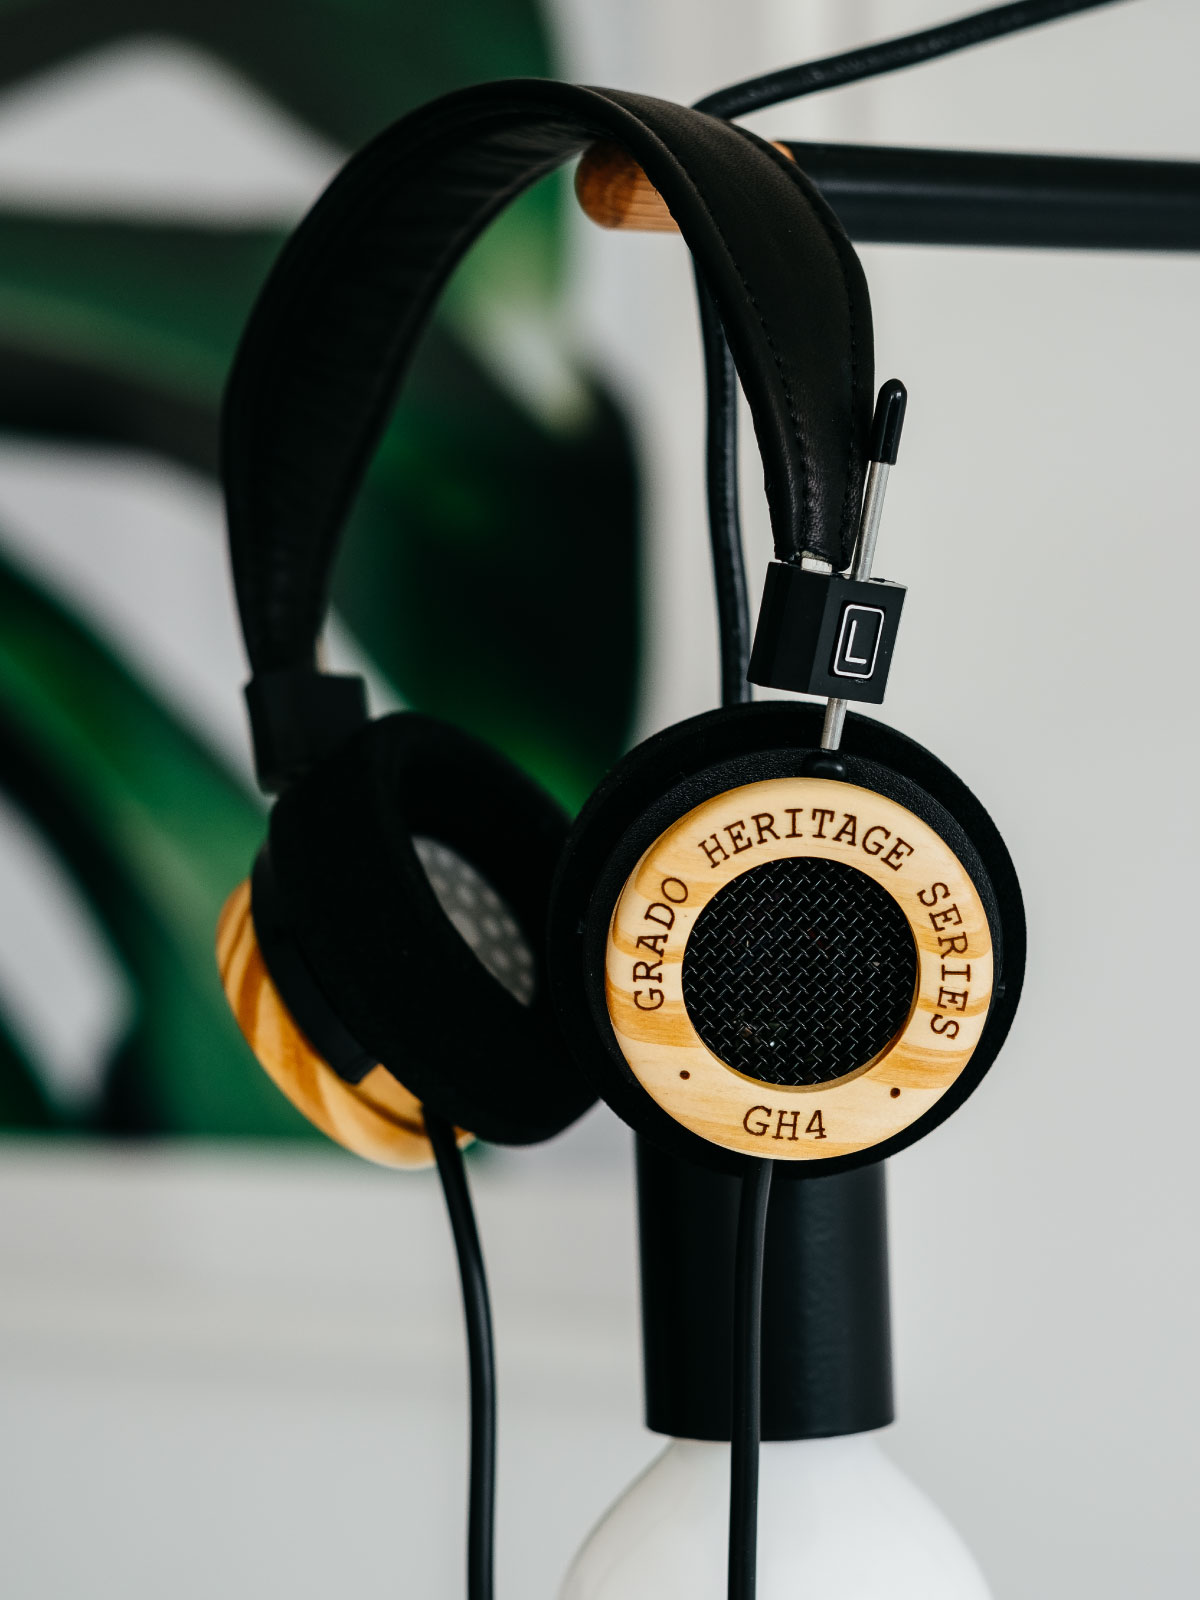 Photo of GH4 headphones with a plant in the background